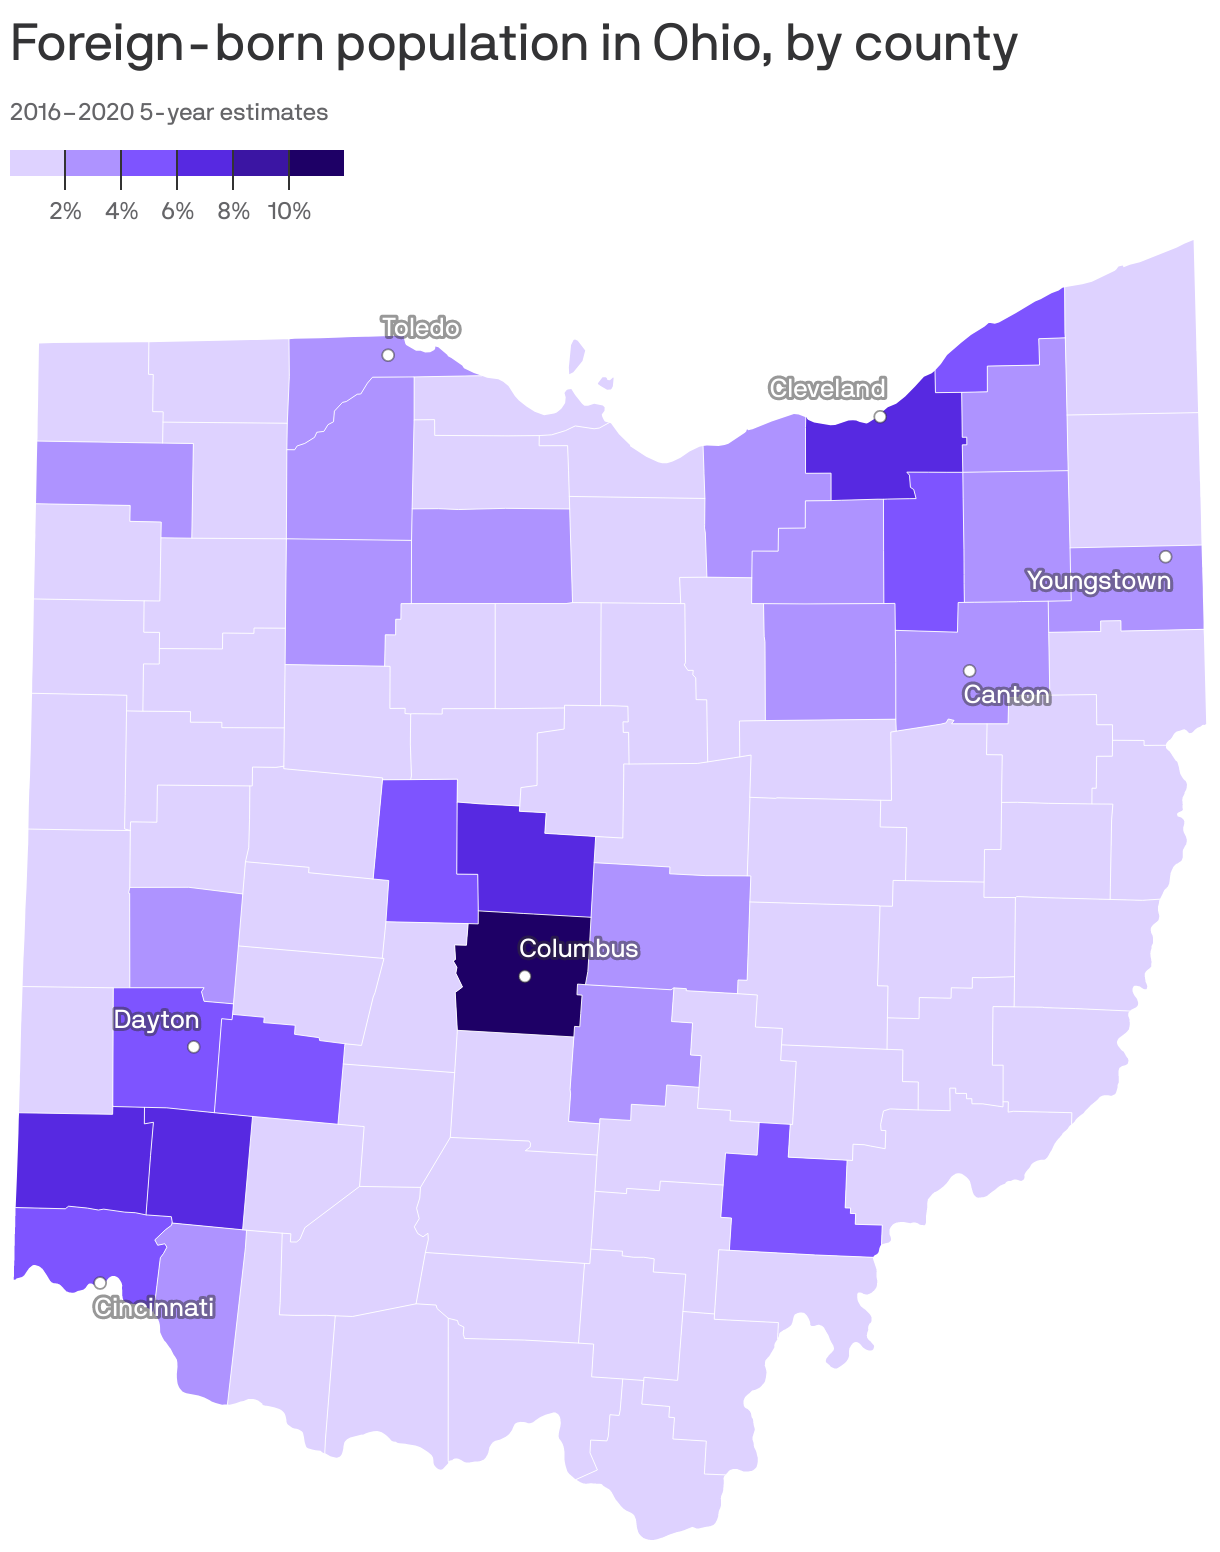 Foreign-born population in Ohio, by county